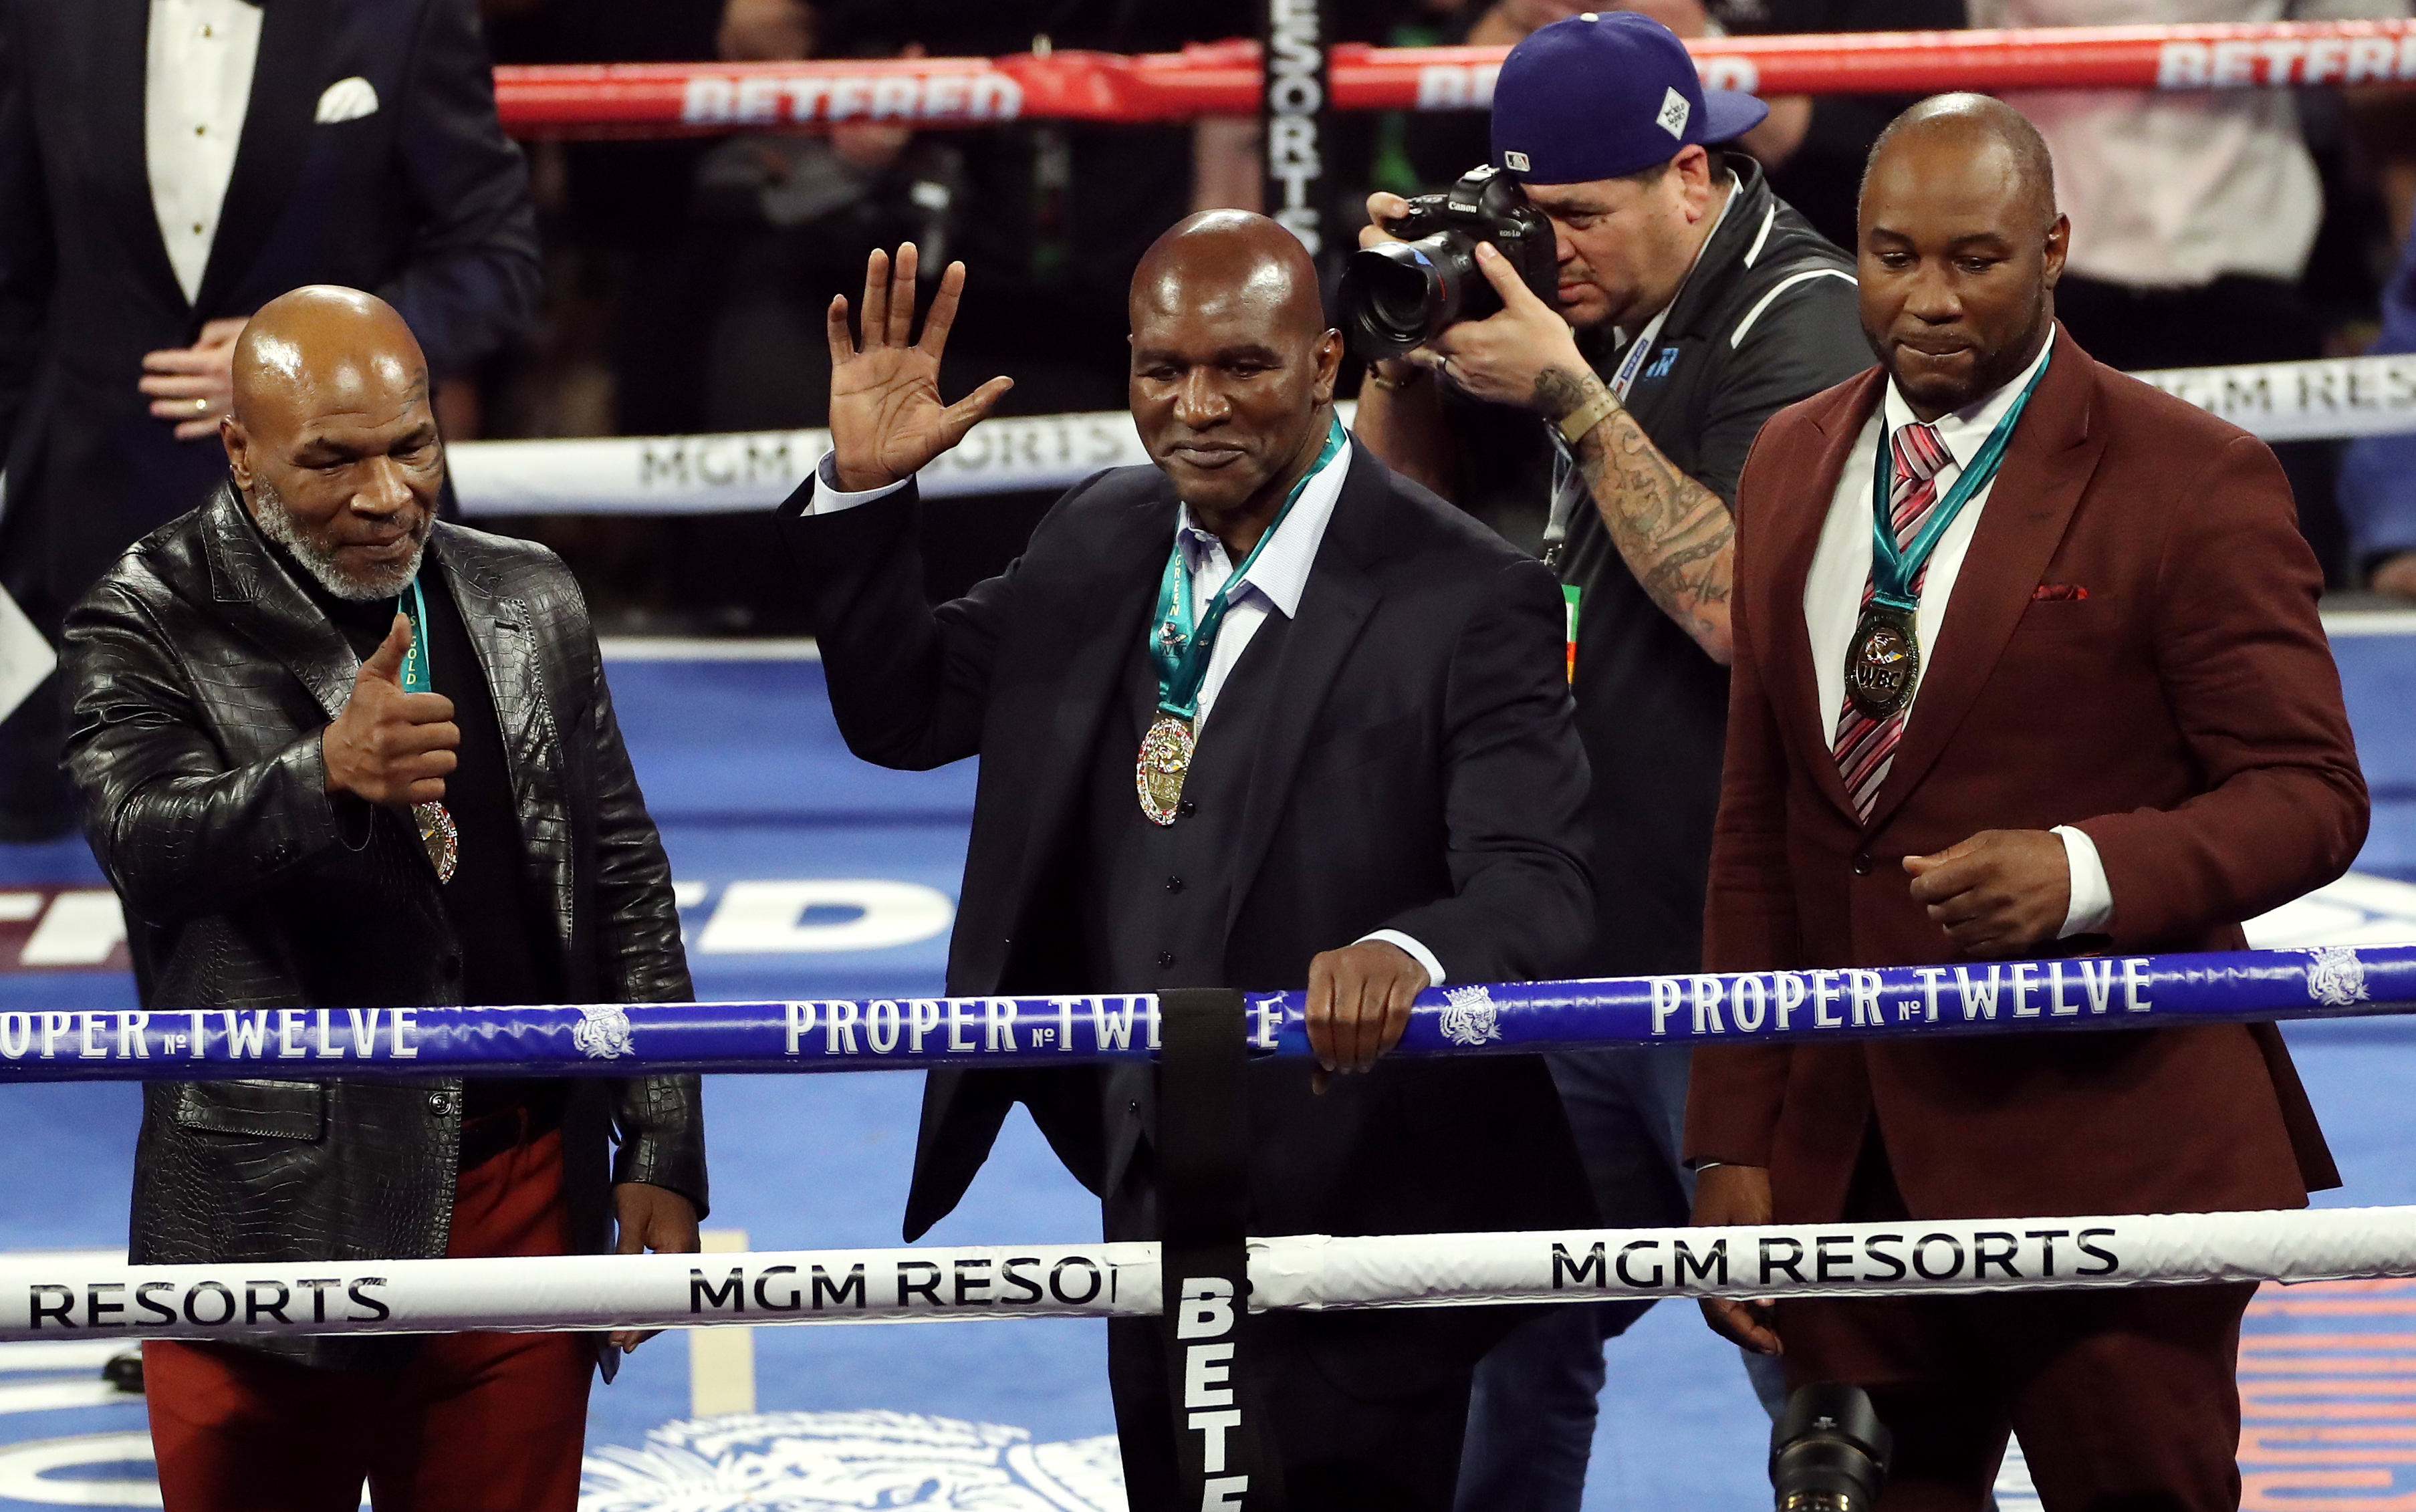 Tyson, Holyfield and Lewis were recently reunited at Wilder vs Fury II. Image: PA Images